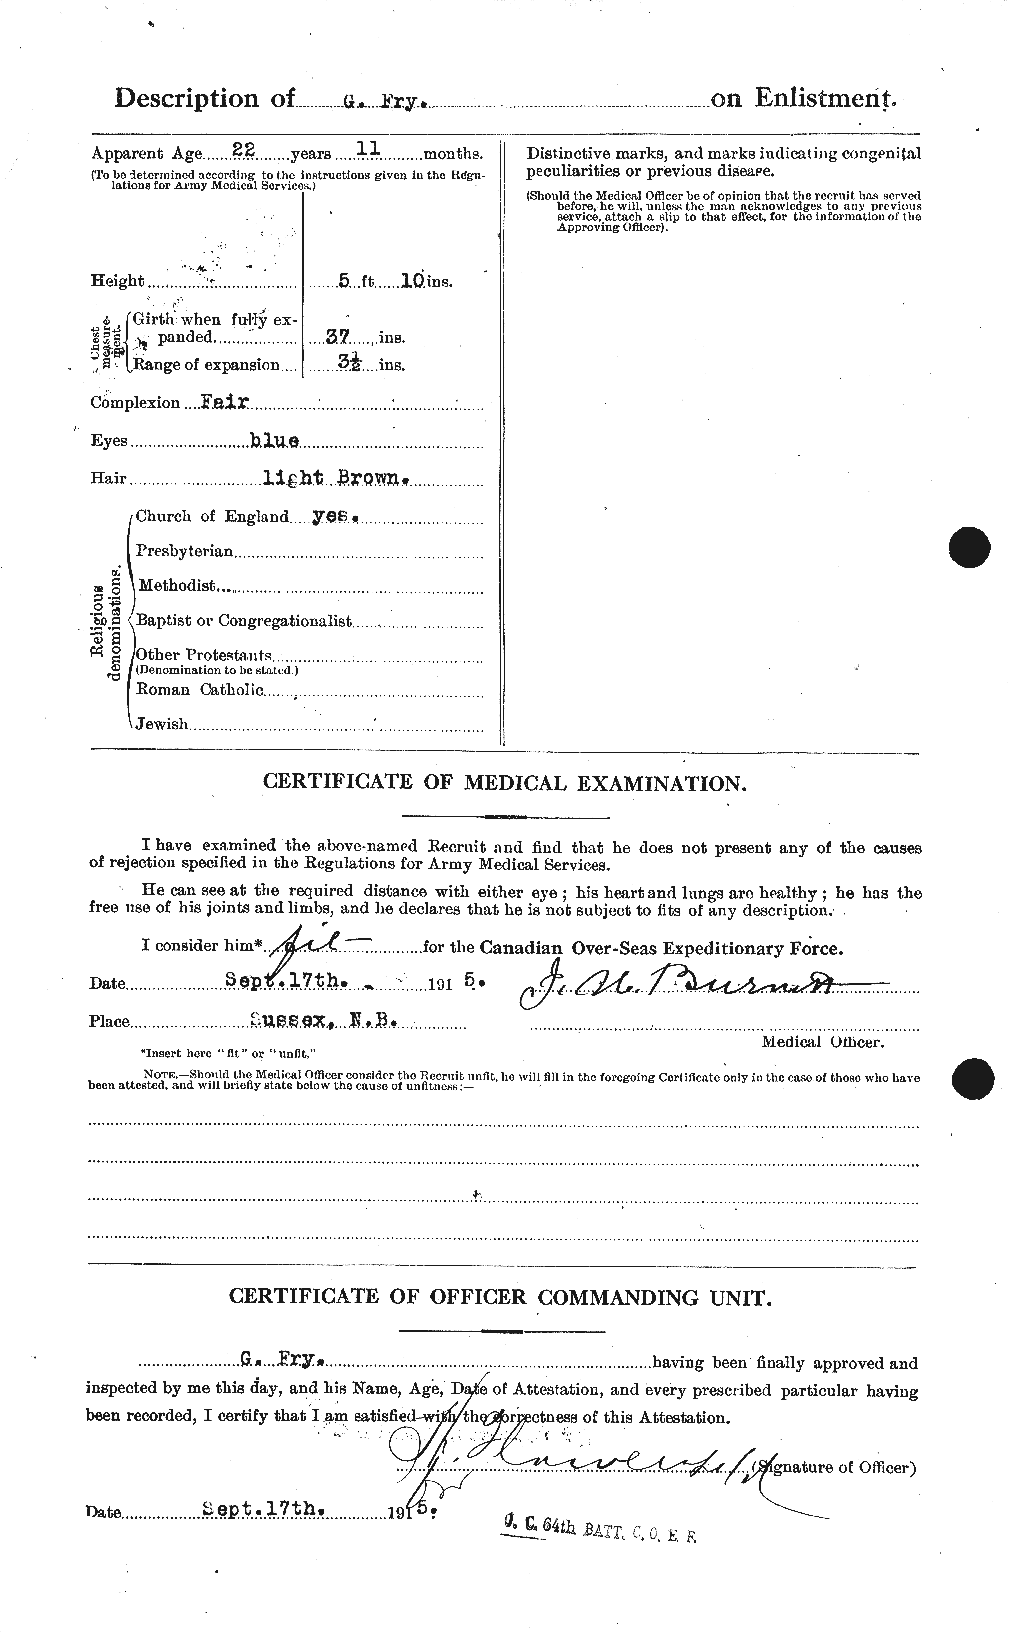 Personnel Records of the First World War - CEF 336908b